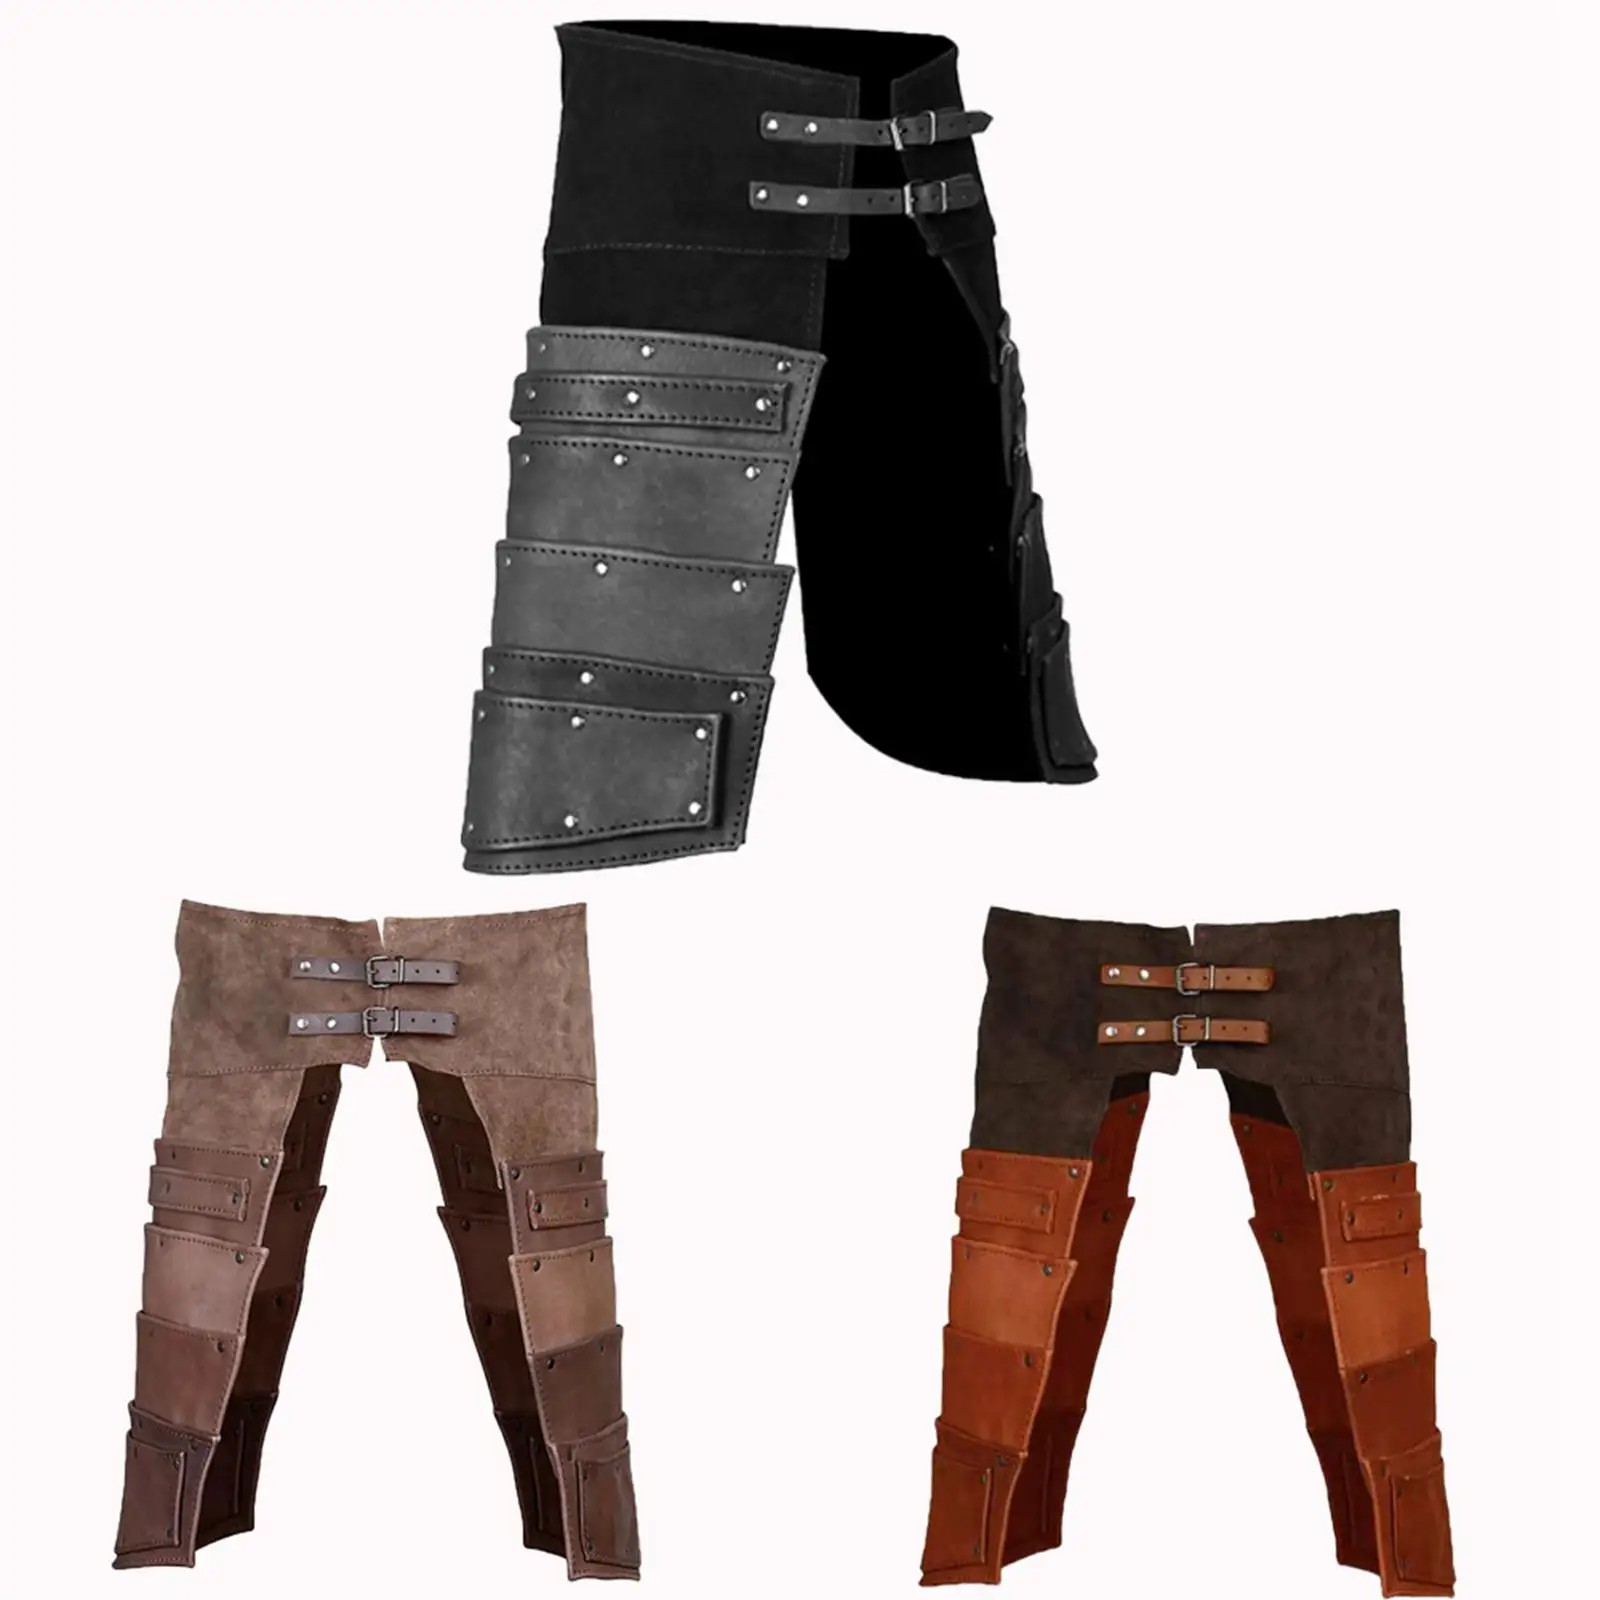 Medieval PU Leather Leg Guards Cosplay Costume Wrap Pirate Boots Tops Covers